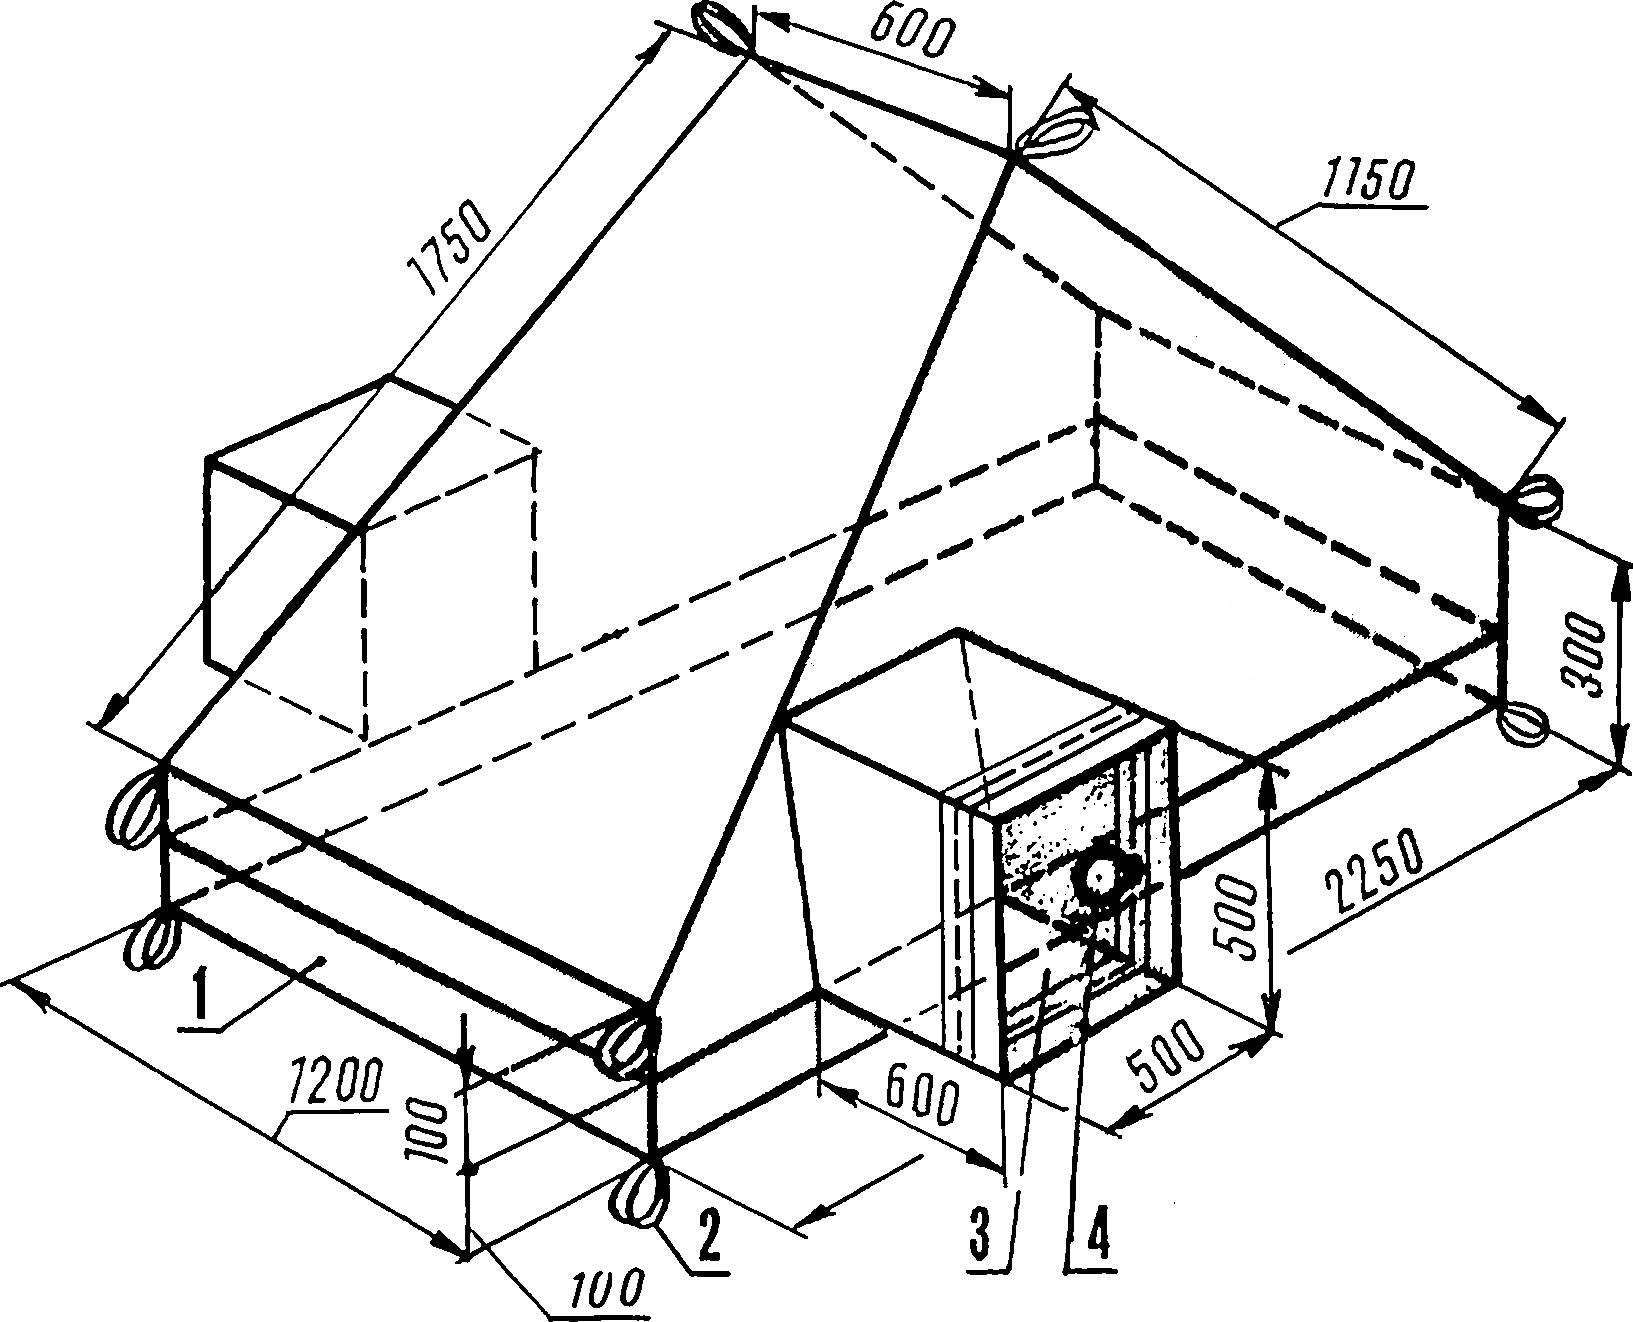 Fig. 3. The inner tent.